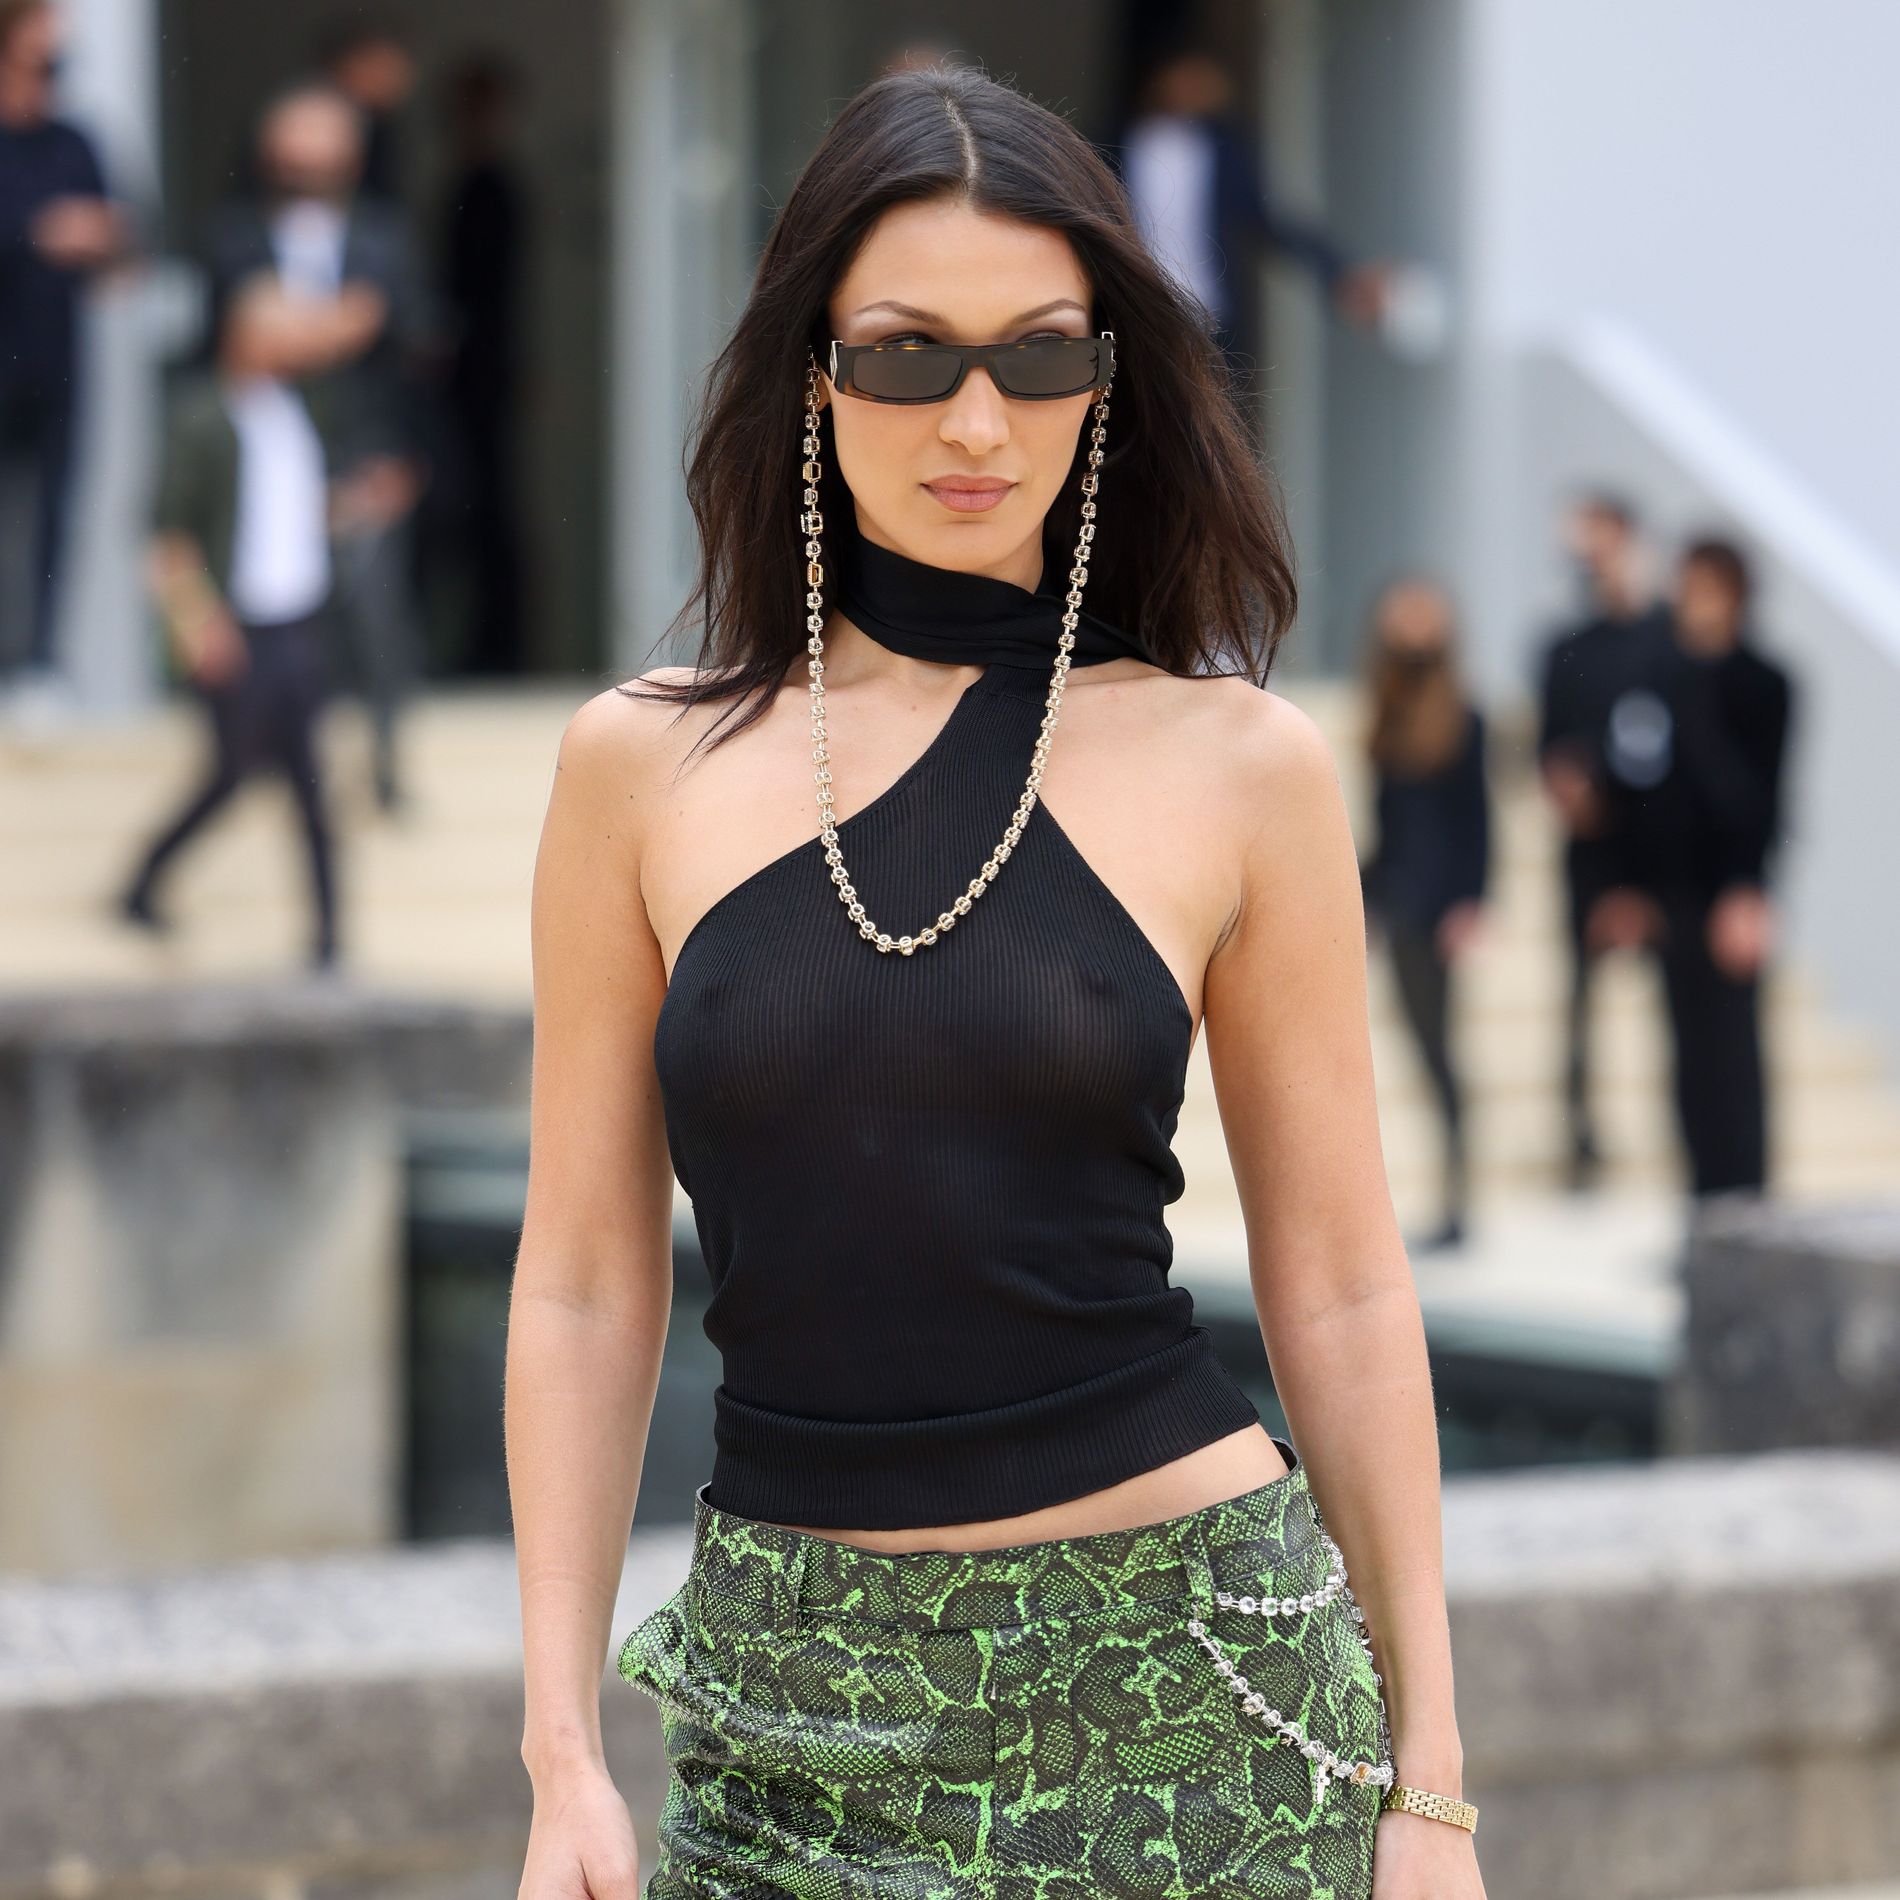  Model Bella Hadid attends the Dior Homme Menswear Spring Summer 2022 show as part of Paris Fashion Week